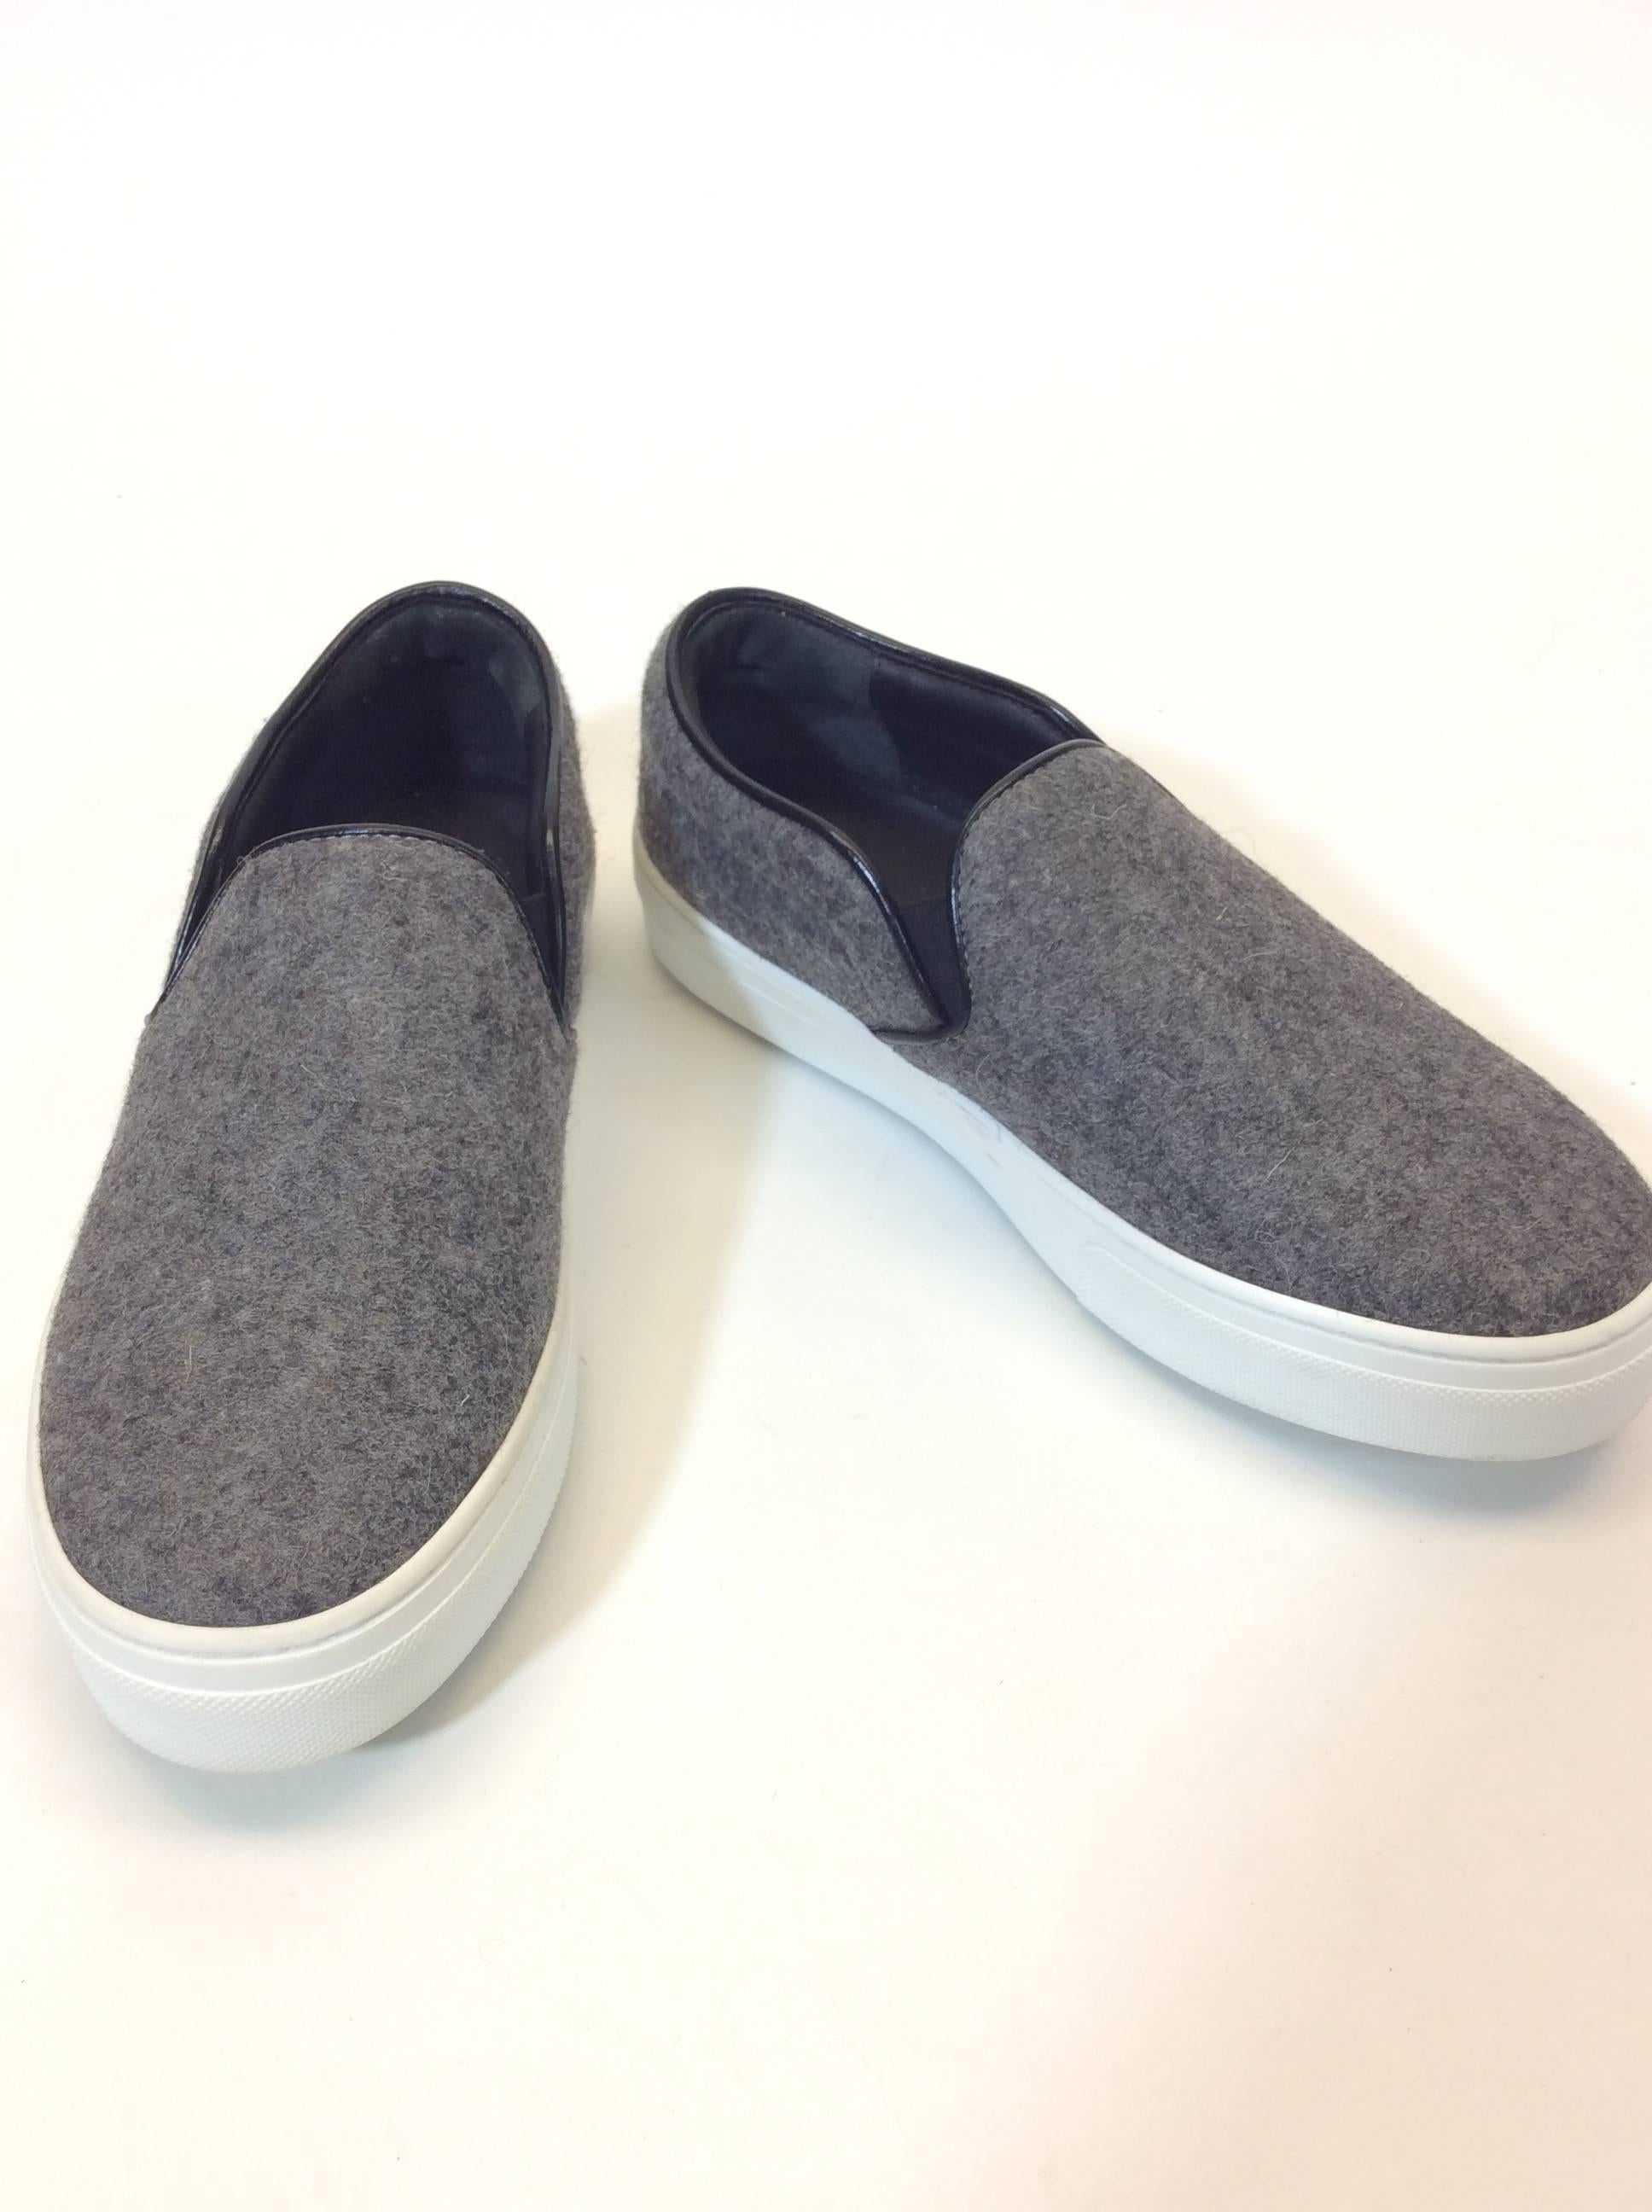 Celine A/W 16 Collection
Light Grey Felt
Slip on Sneakers with Stretch Sides
Rubber Soles
Includes Box and Dust Bag
EU Size 36
4